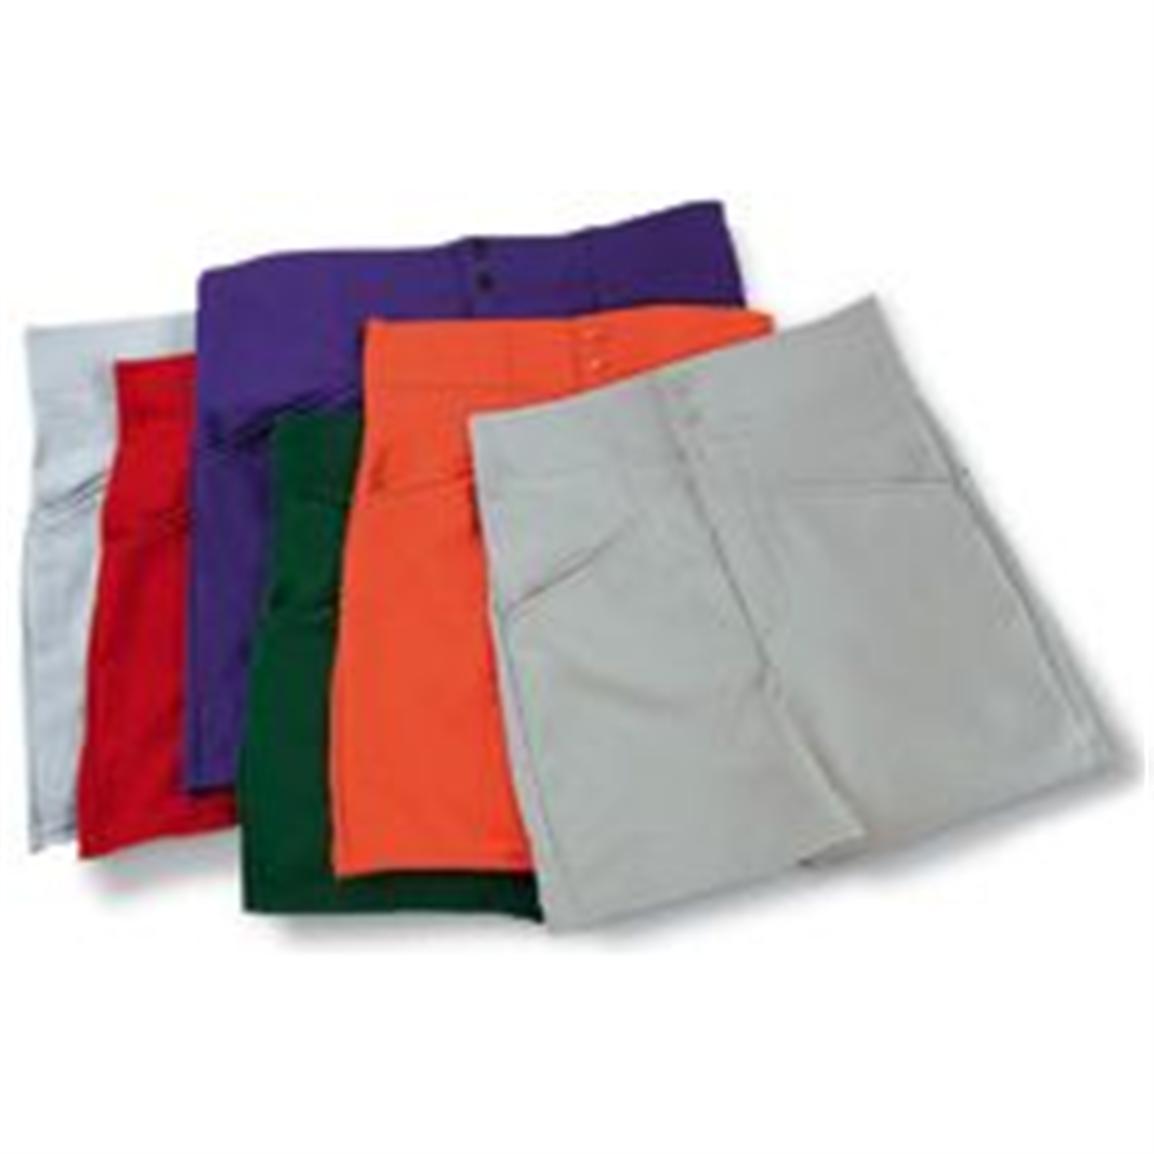 Polyester Coaches' Shorts - 38965, at Sportsman's Guide